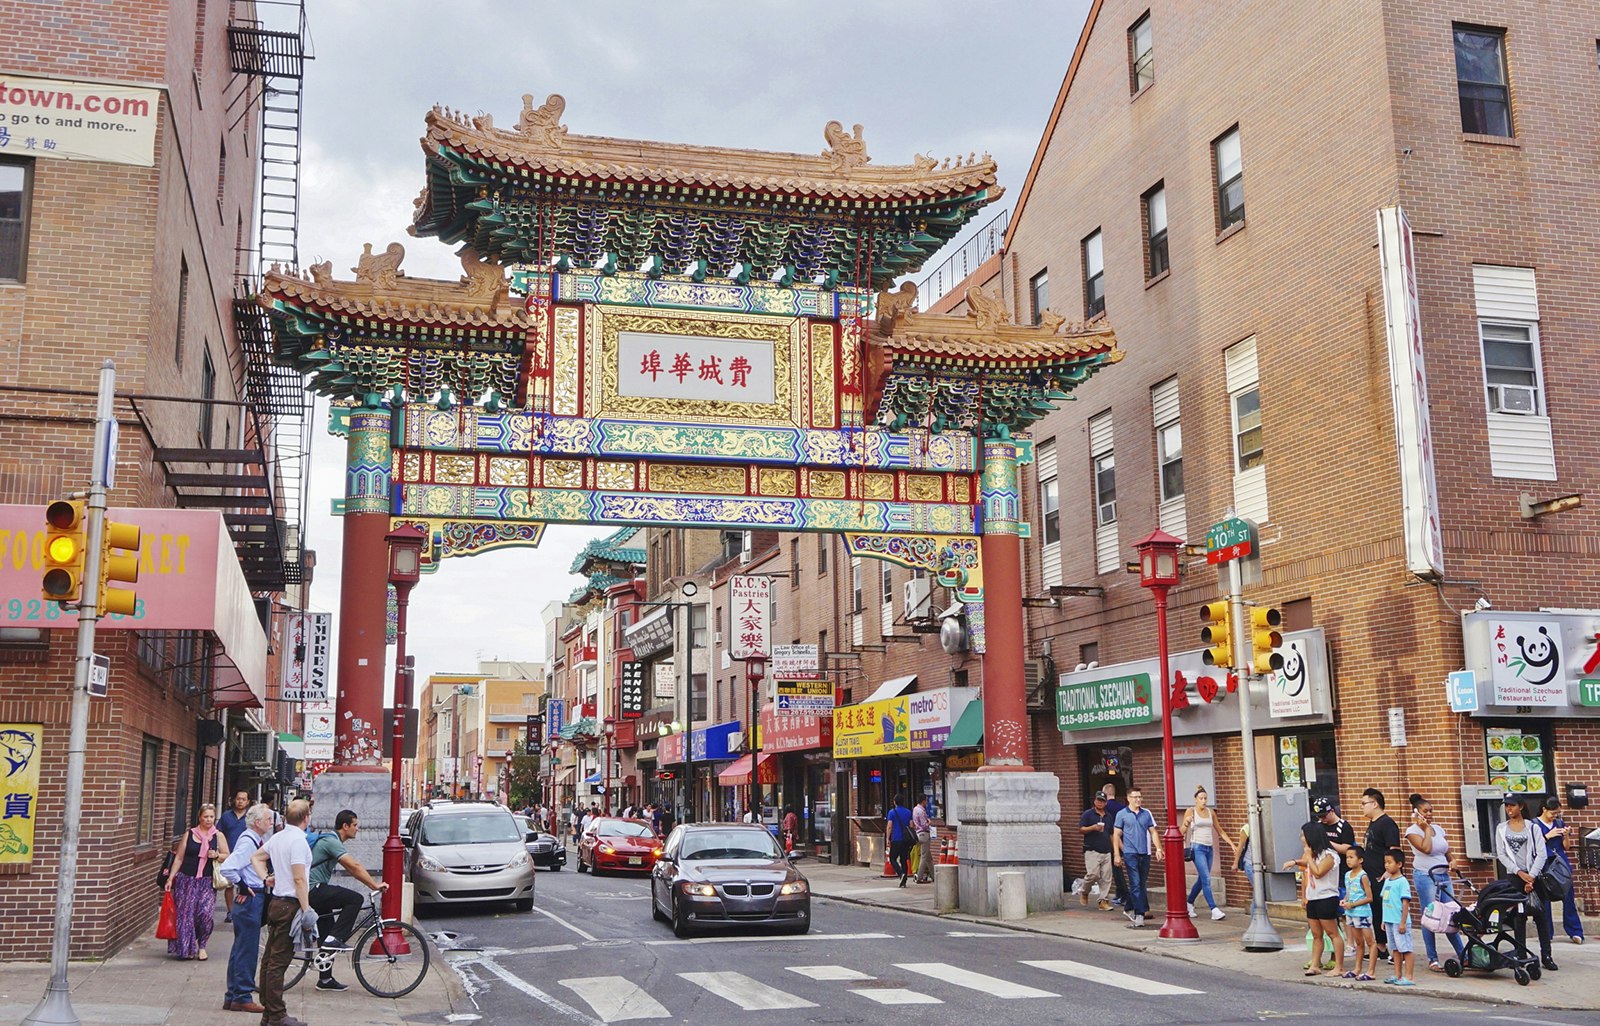 Distance shot of the ornate Chinatown Friendship gate that is at the entrance to Chinatown in Philadelphia